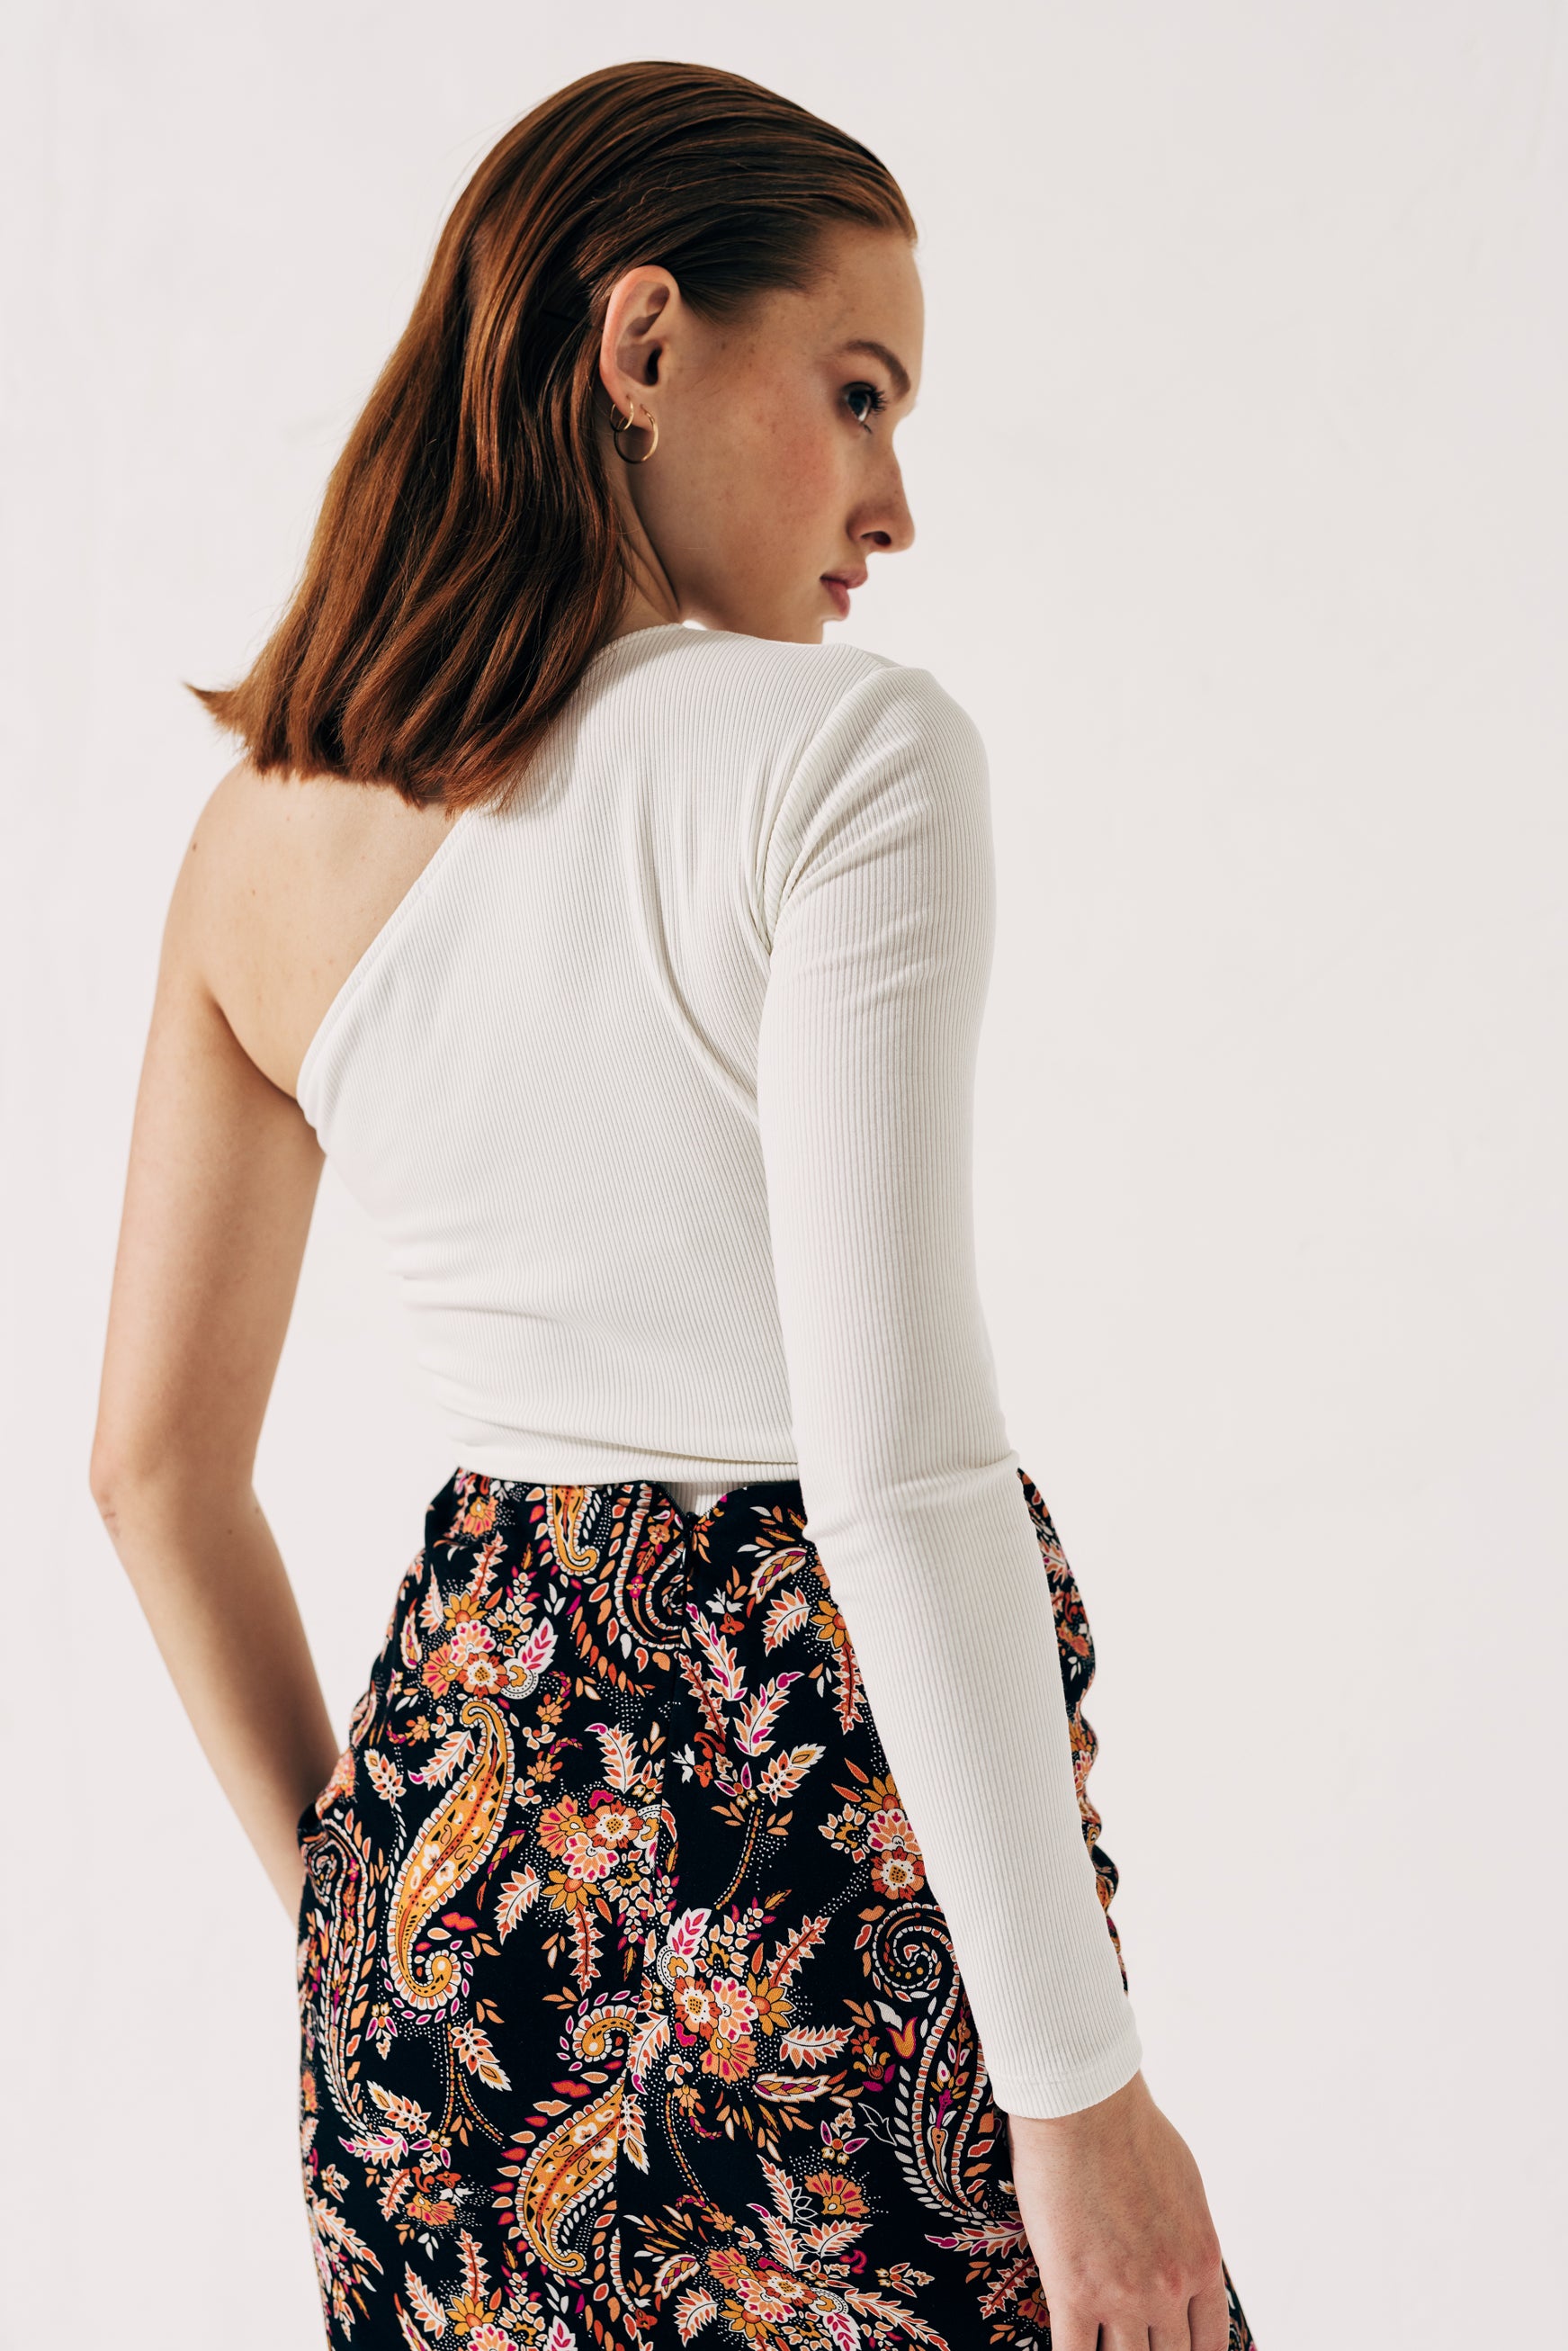 100% Viscose high-waist midi skirt with front knot and slit in paisley print